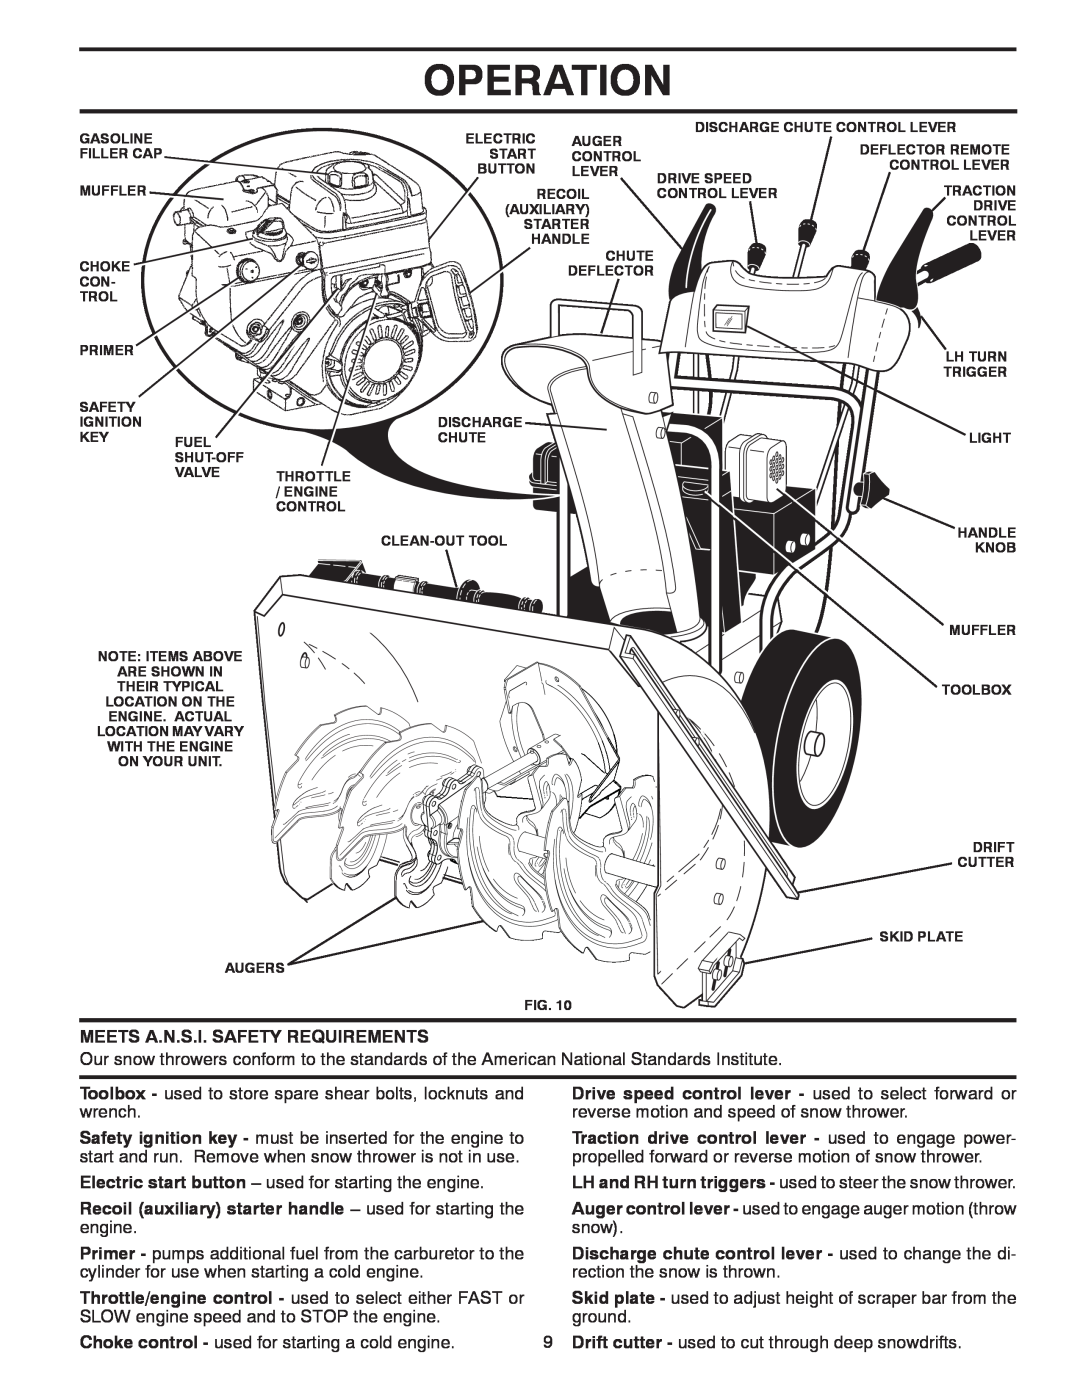 Husqvarna 96193006600, 11524E manual Operation, Meets A.N.S.I. Safety Requirements 